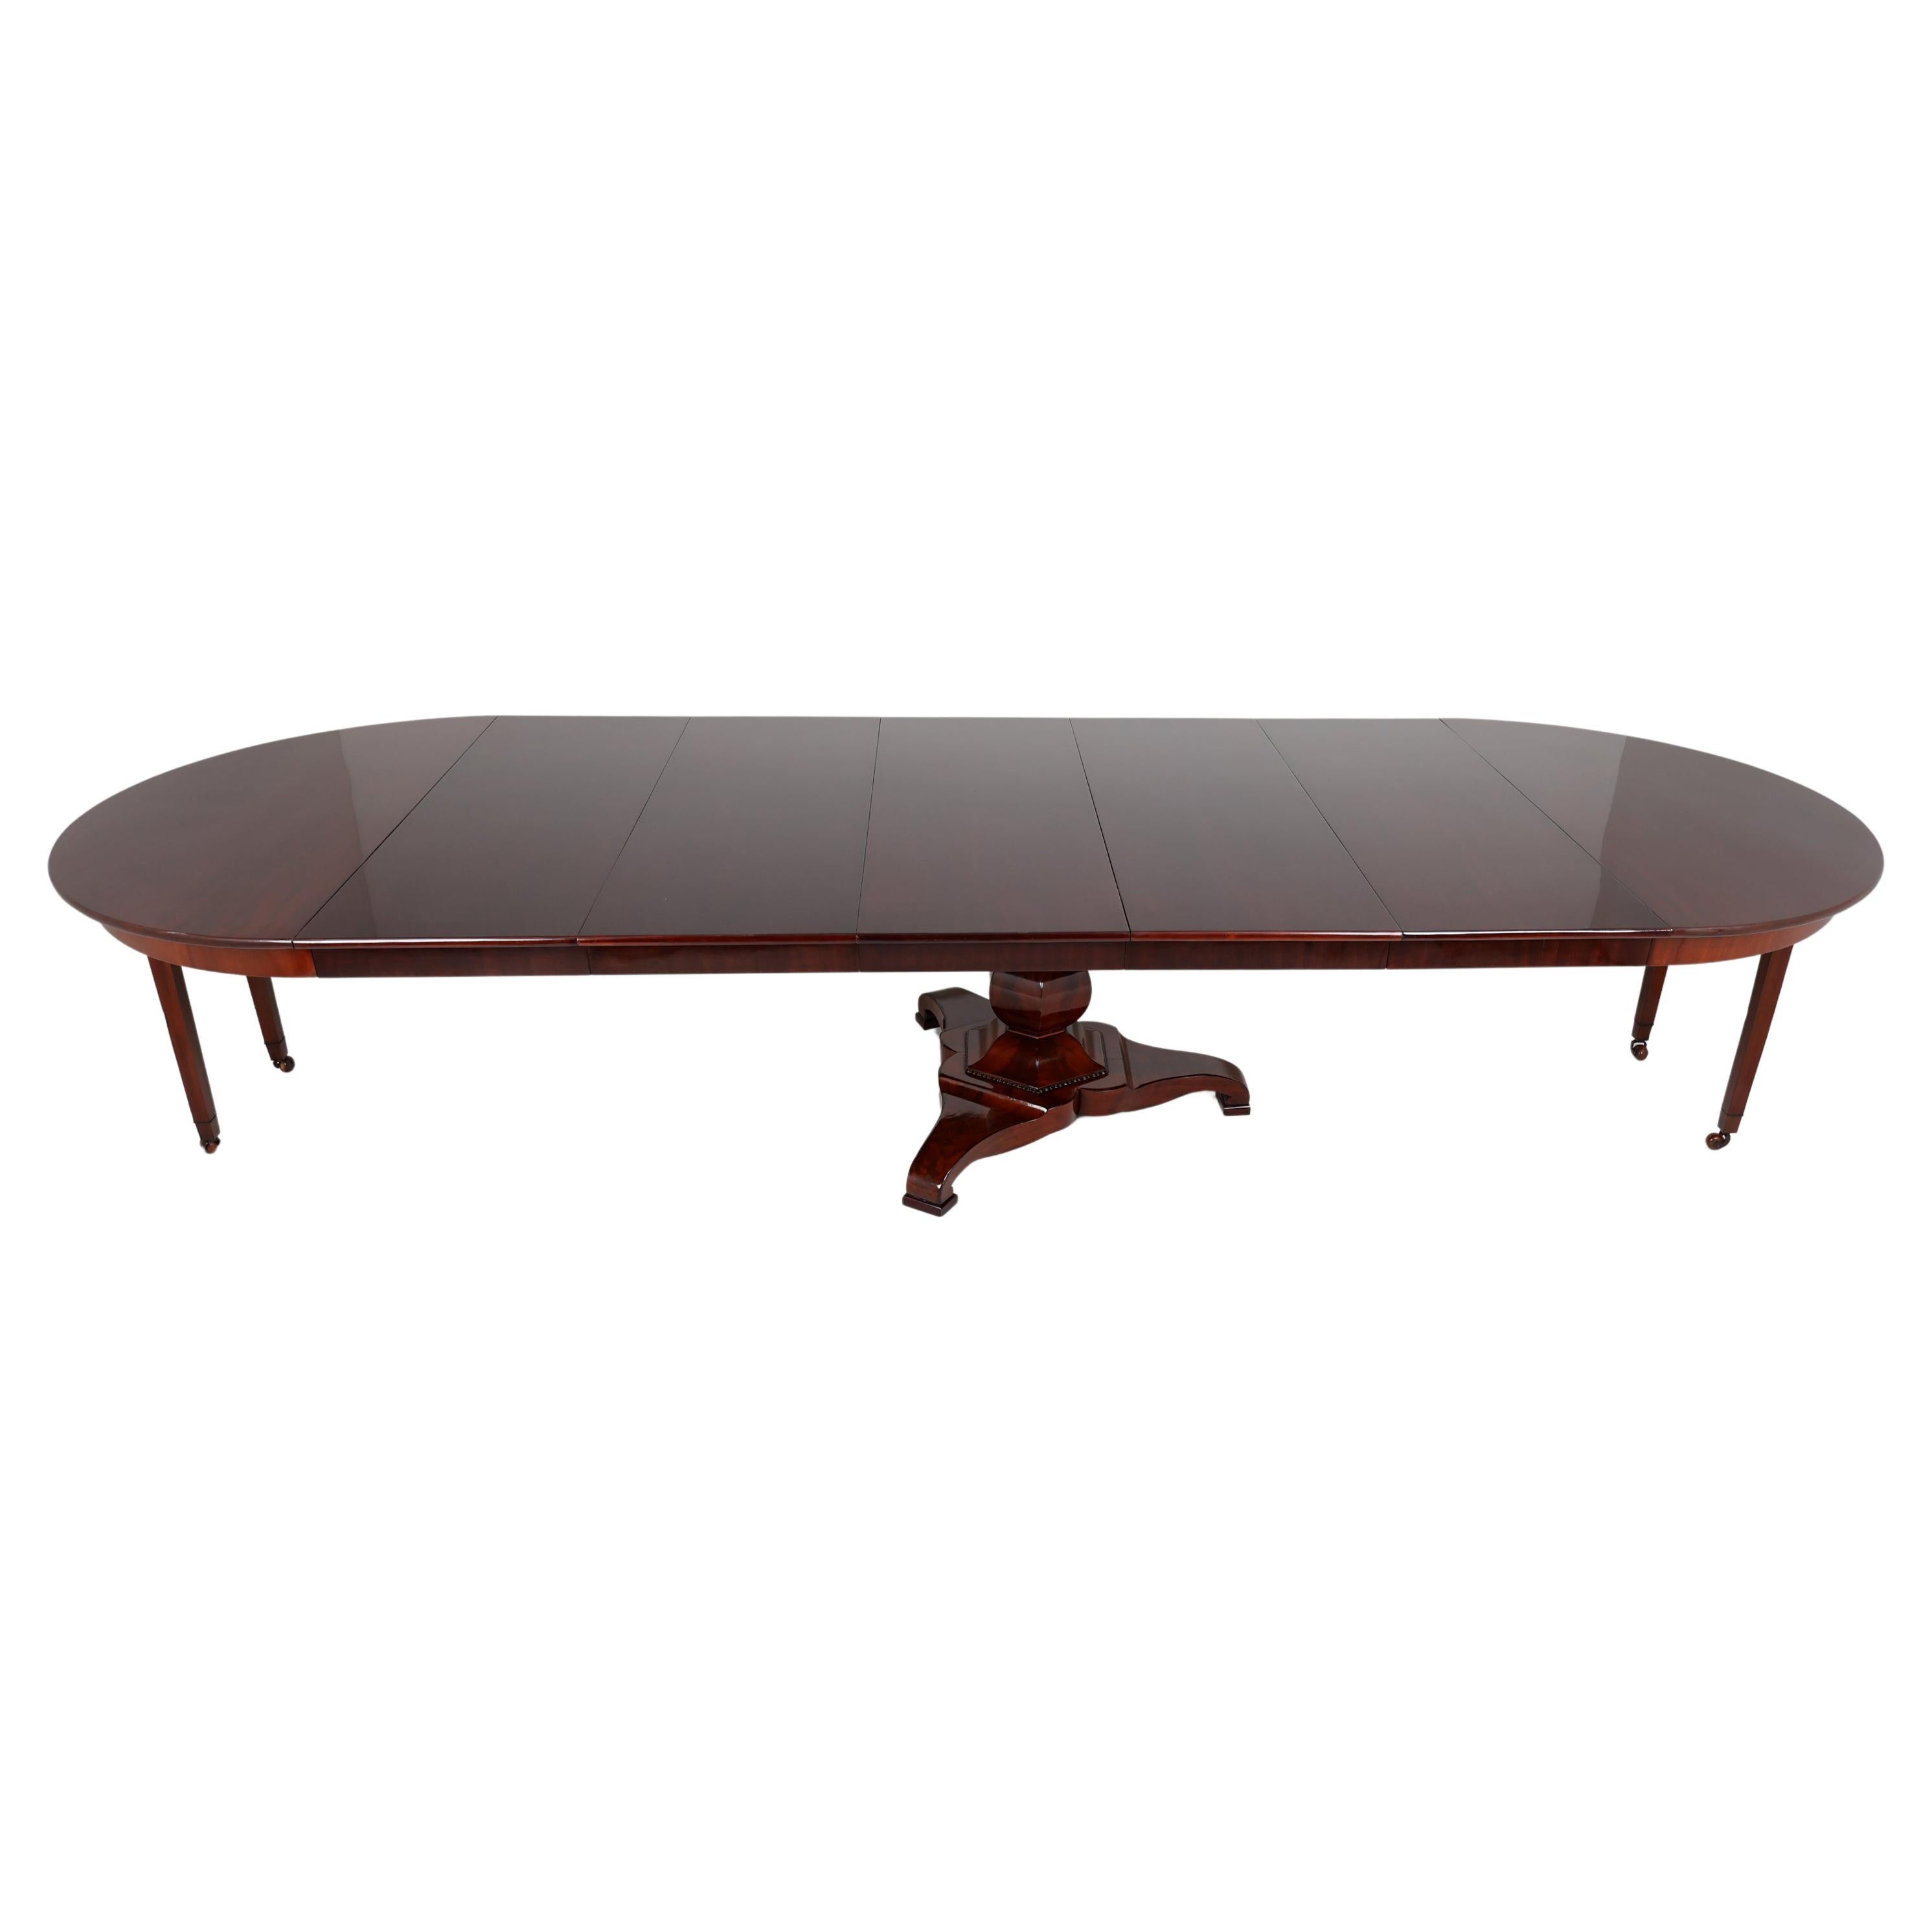 19th Century Mahogany Dining Room Table, 177 inches Long For Sale